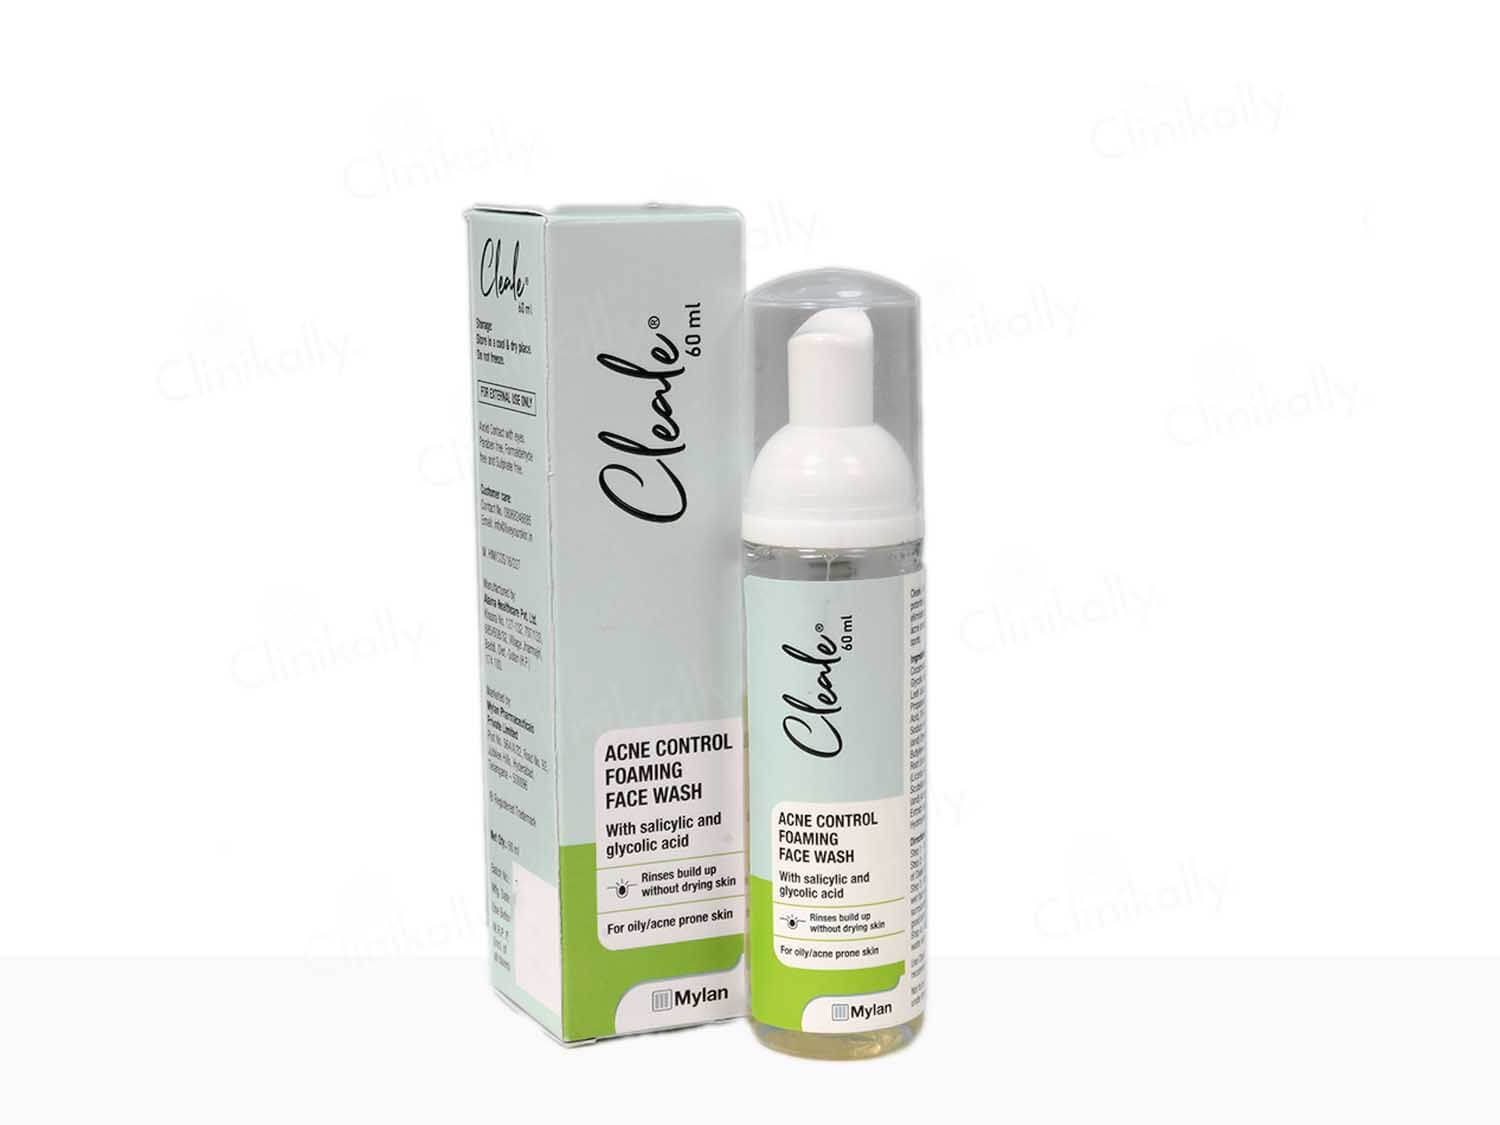 Cleale Acne Control Foaming Face Wash - Clinikally